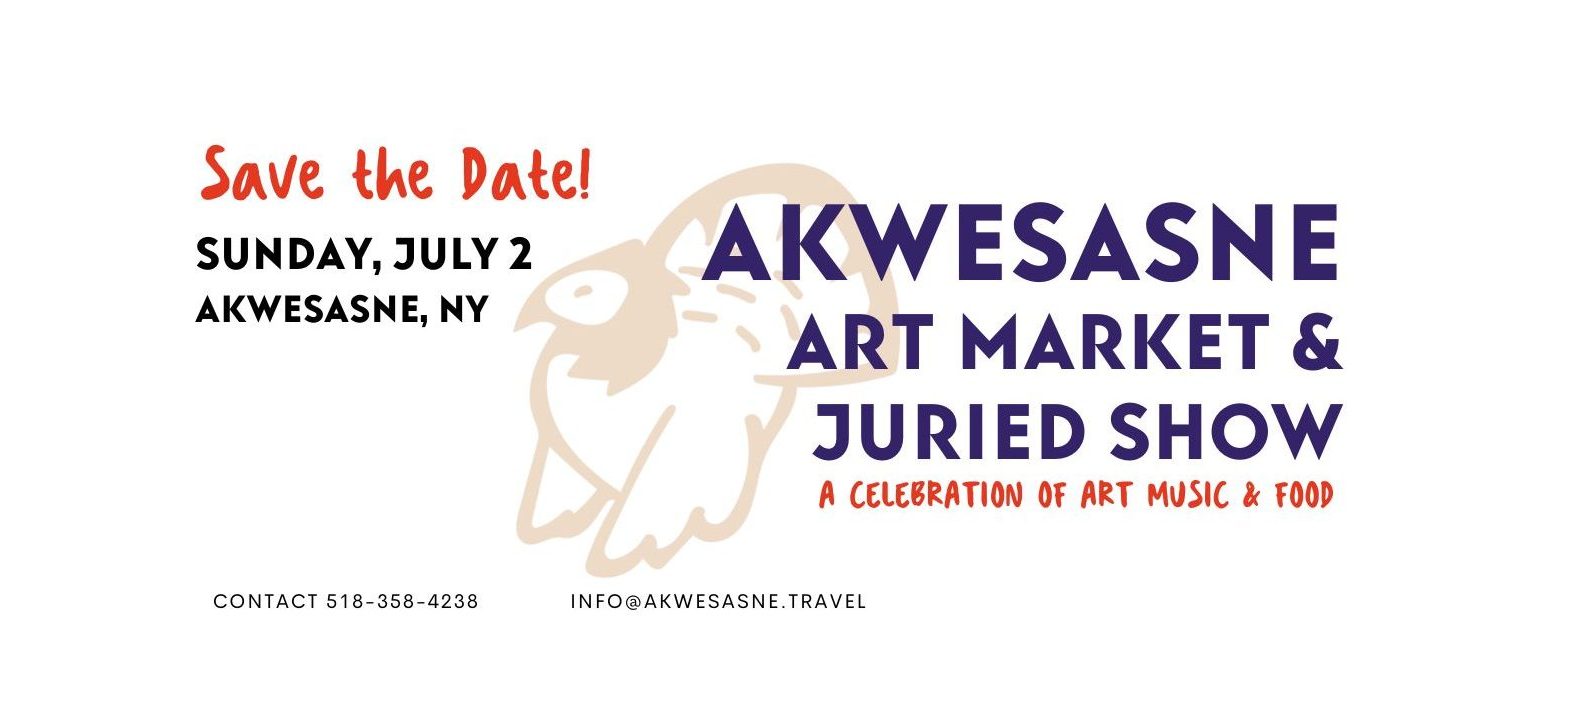 Join us for our 2nd Annual Akwesasne Art Market & Juried Show! More information coming soon.